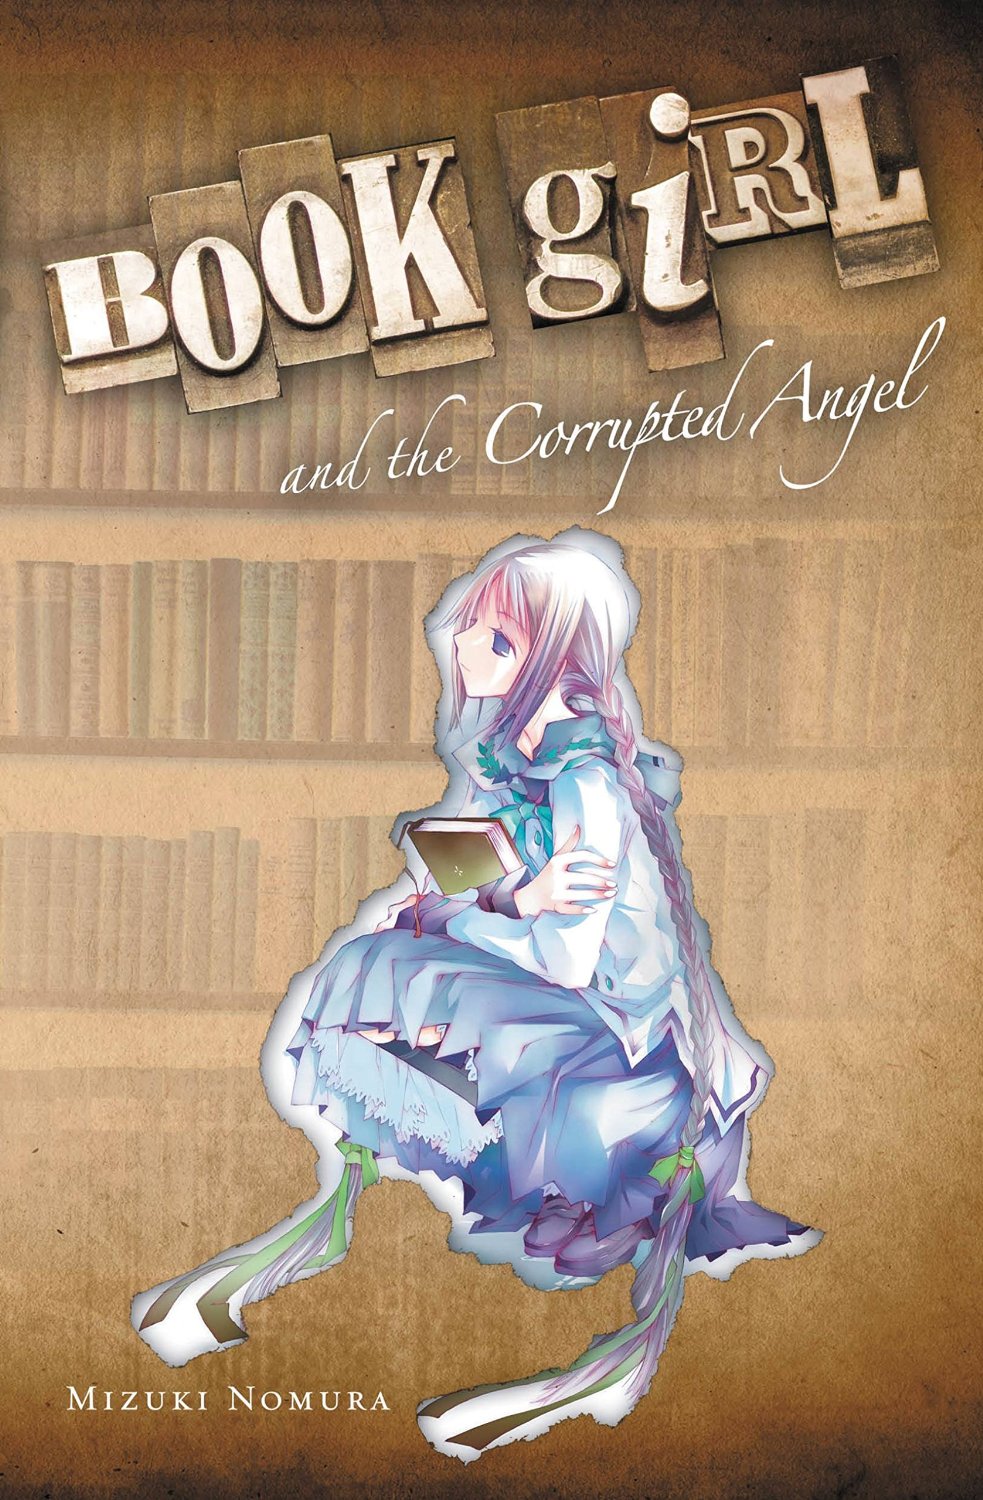 Book Girl and the Corrupted Angel by Mizuki Nomura